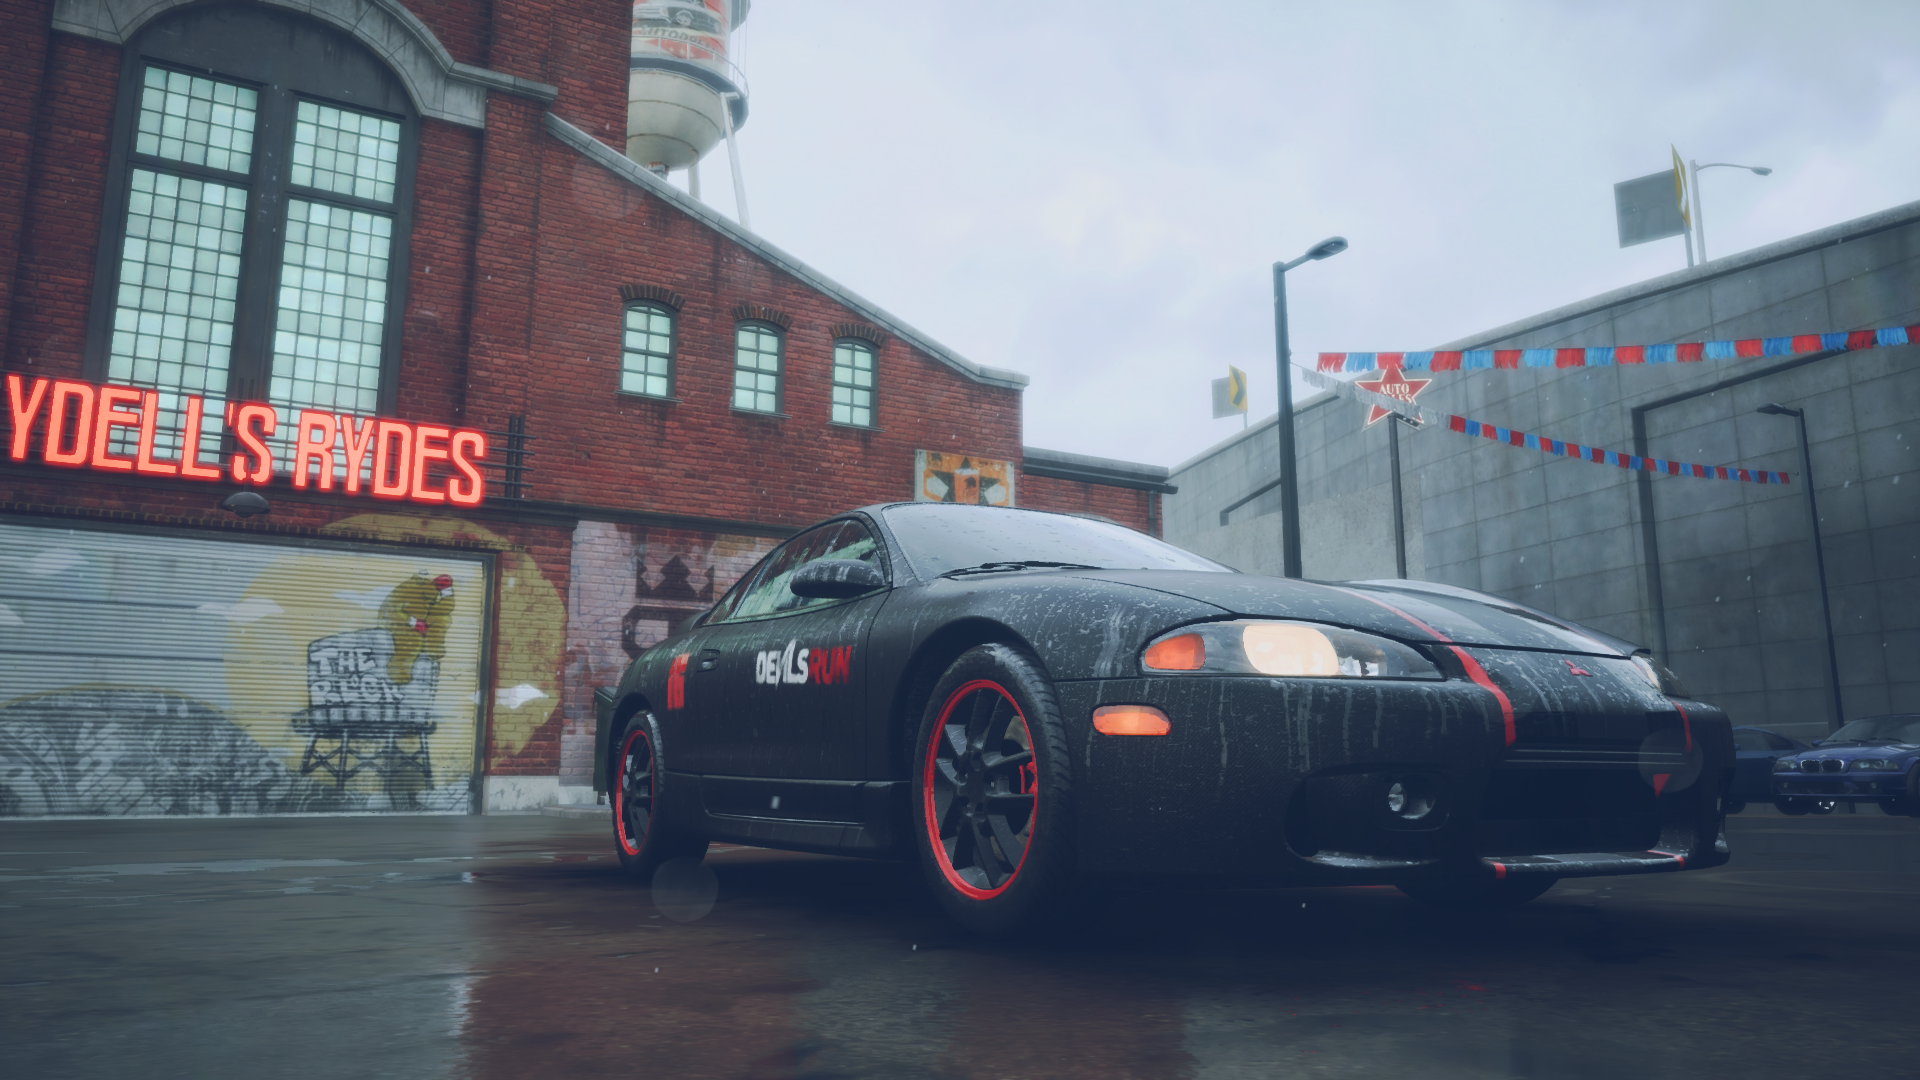 General 1920x1080 Need for Speed Need for speed Unbound video games car CGI frontal view headlights building neon sign